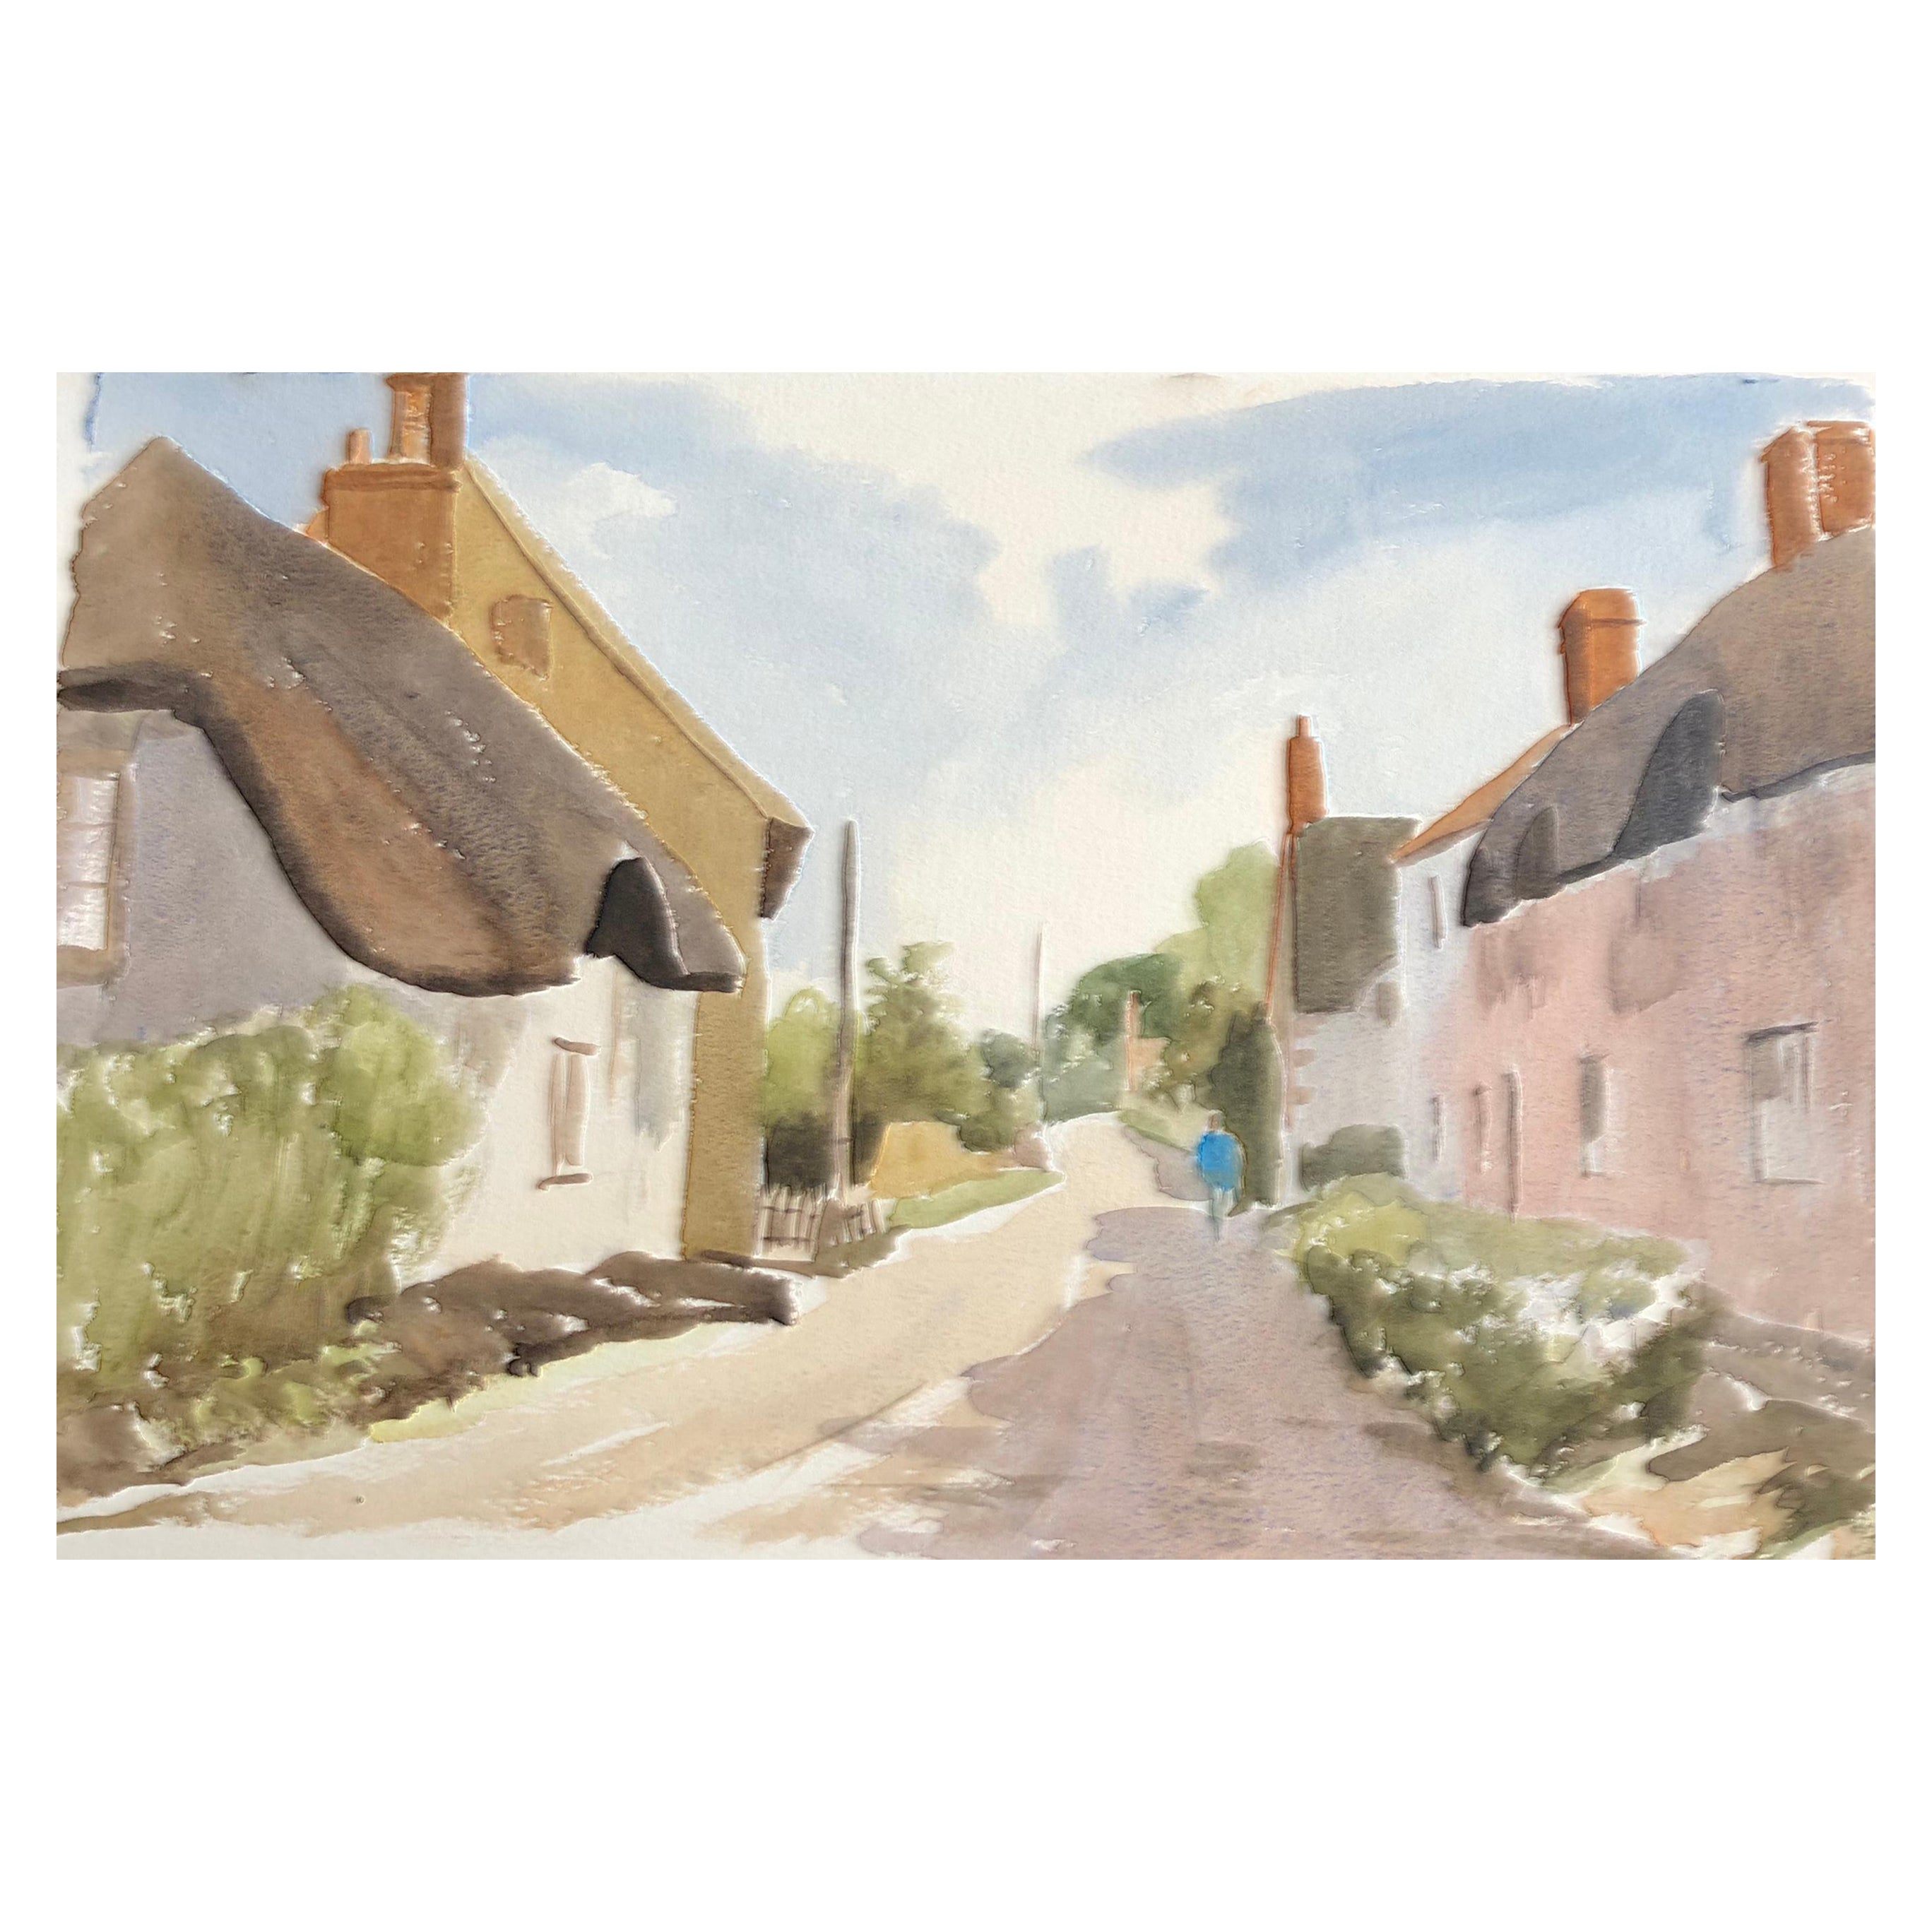 Thatched Cottages Rural Street, Original British Watercolour Painting For Sale